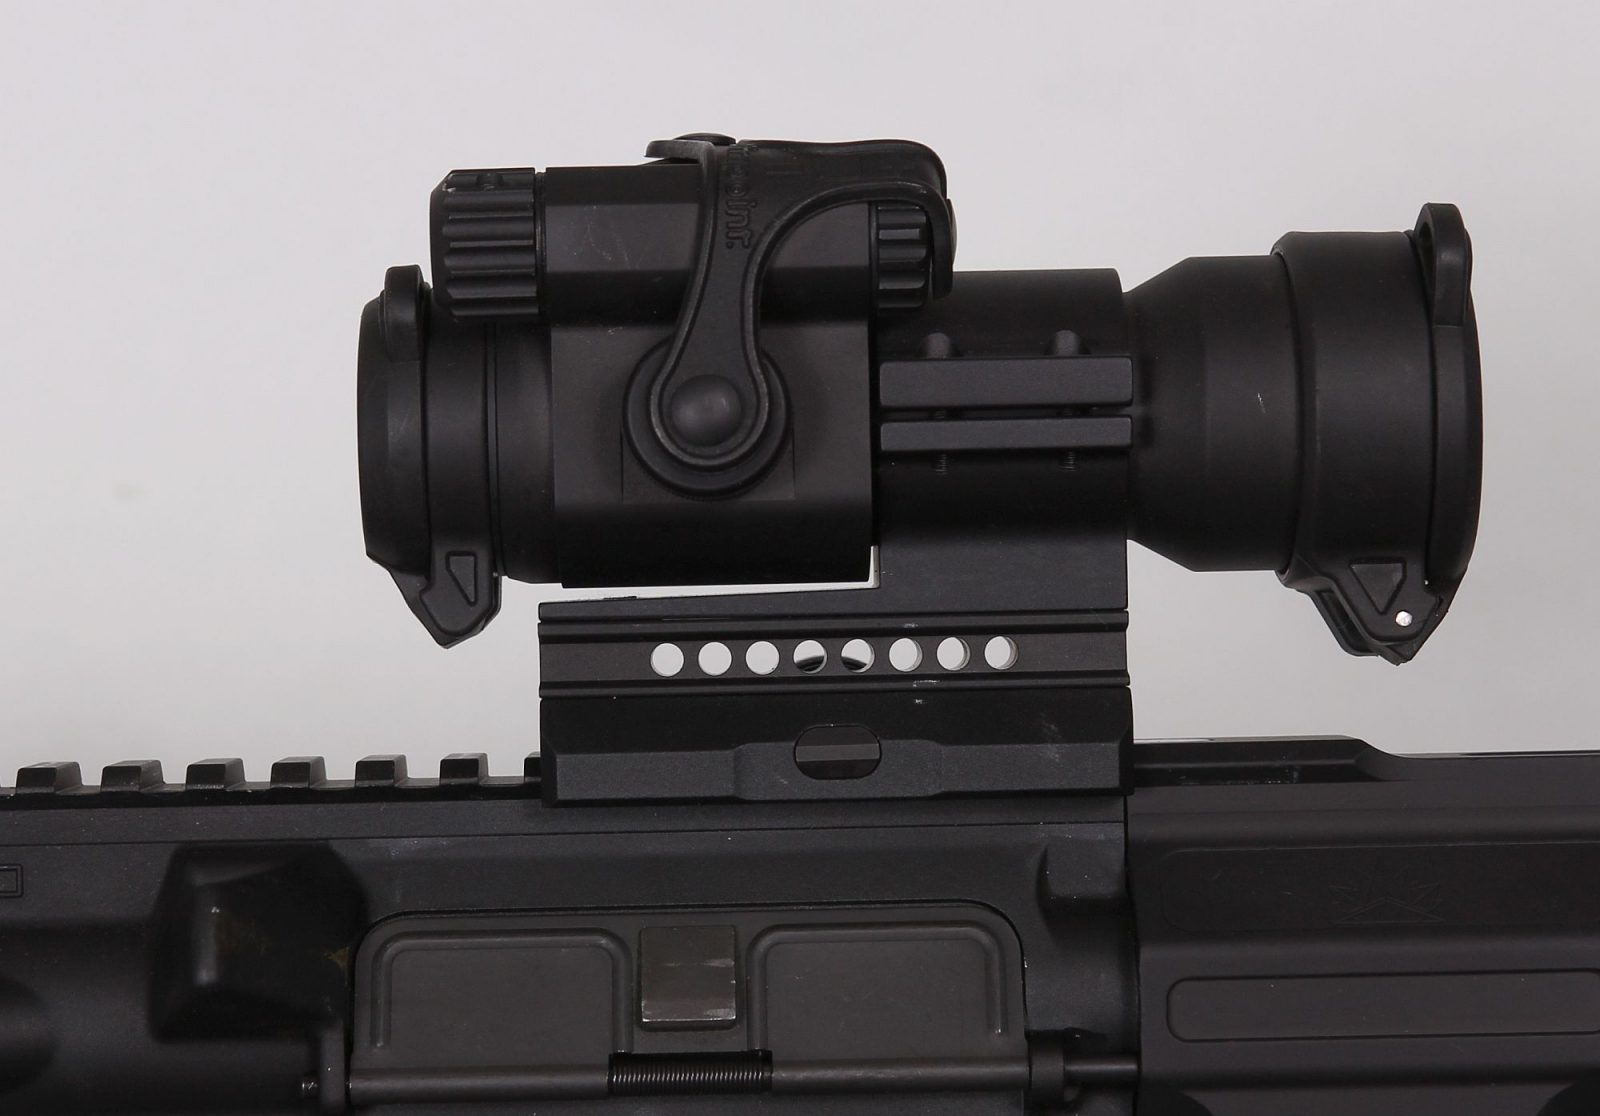 Aimpoint PRO Review